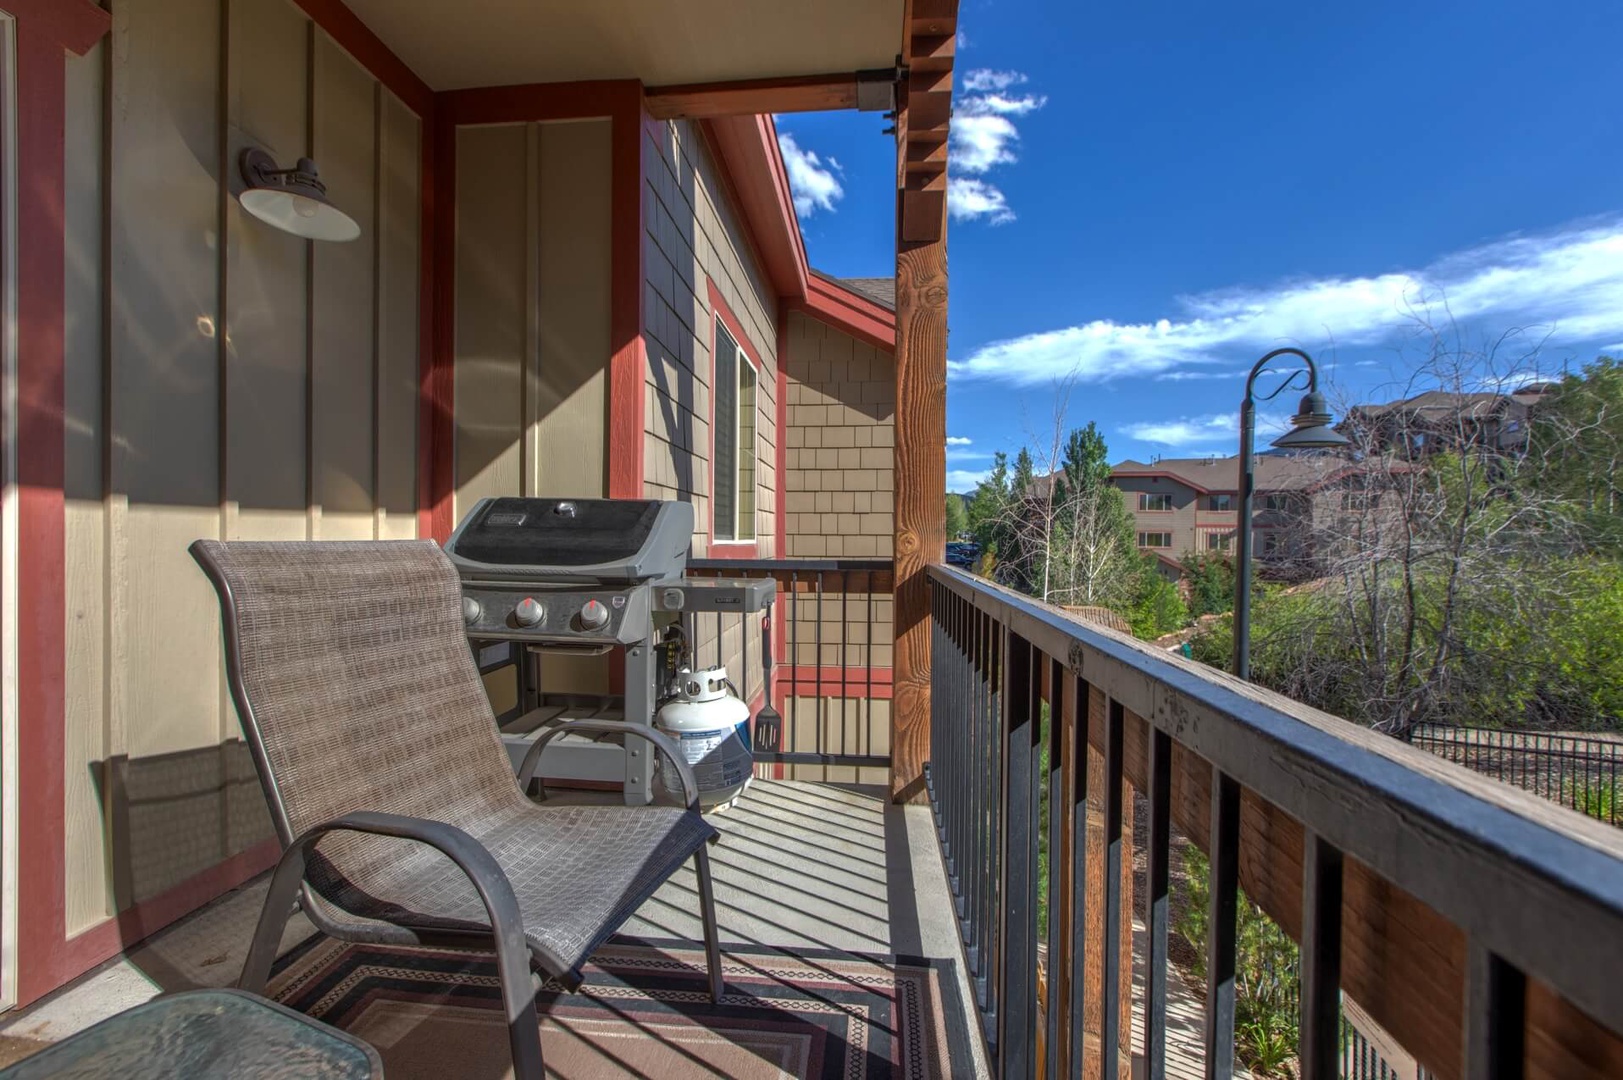 Bear Hollow Lodges 1304: The large outdoor balcony with seating and gas grill, accessed through the living room, opens to glorious views and fresh air of the beautiful mountains.